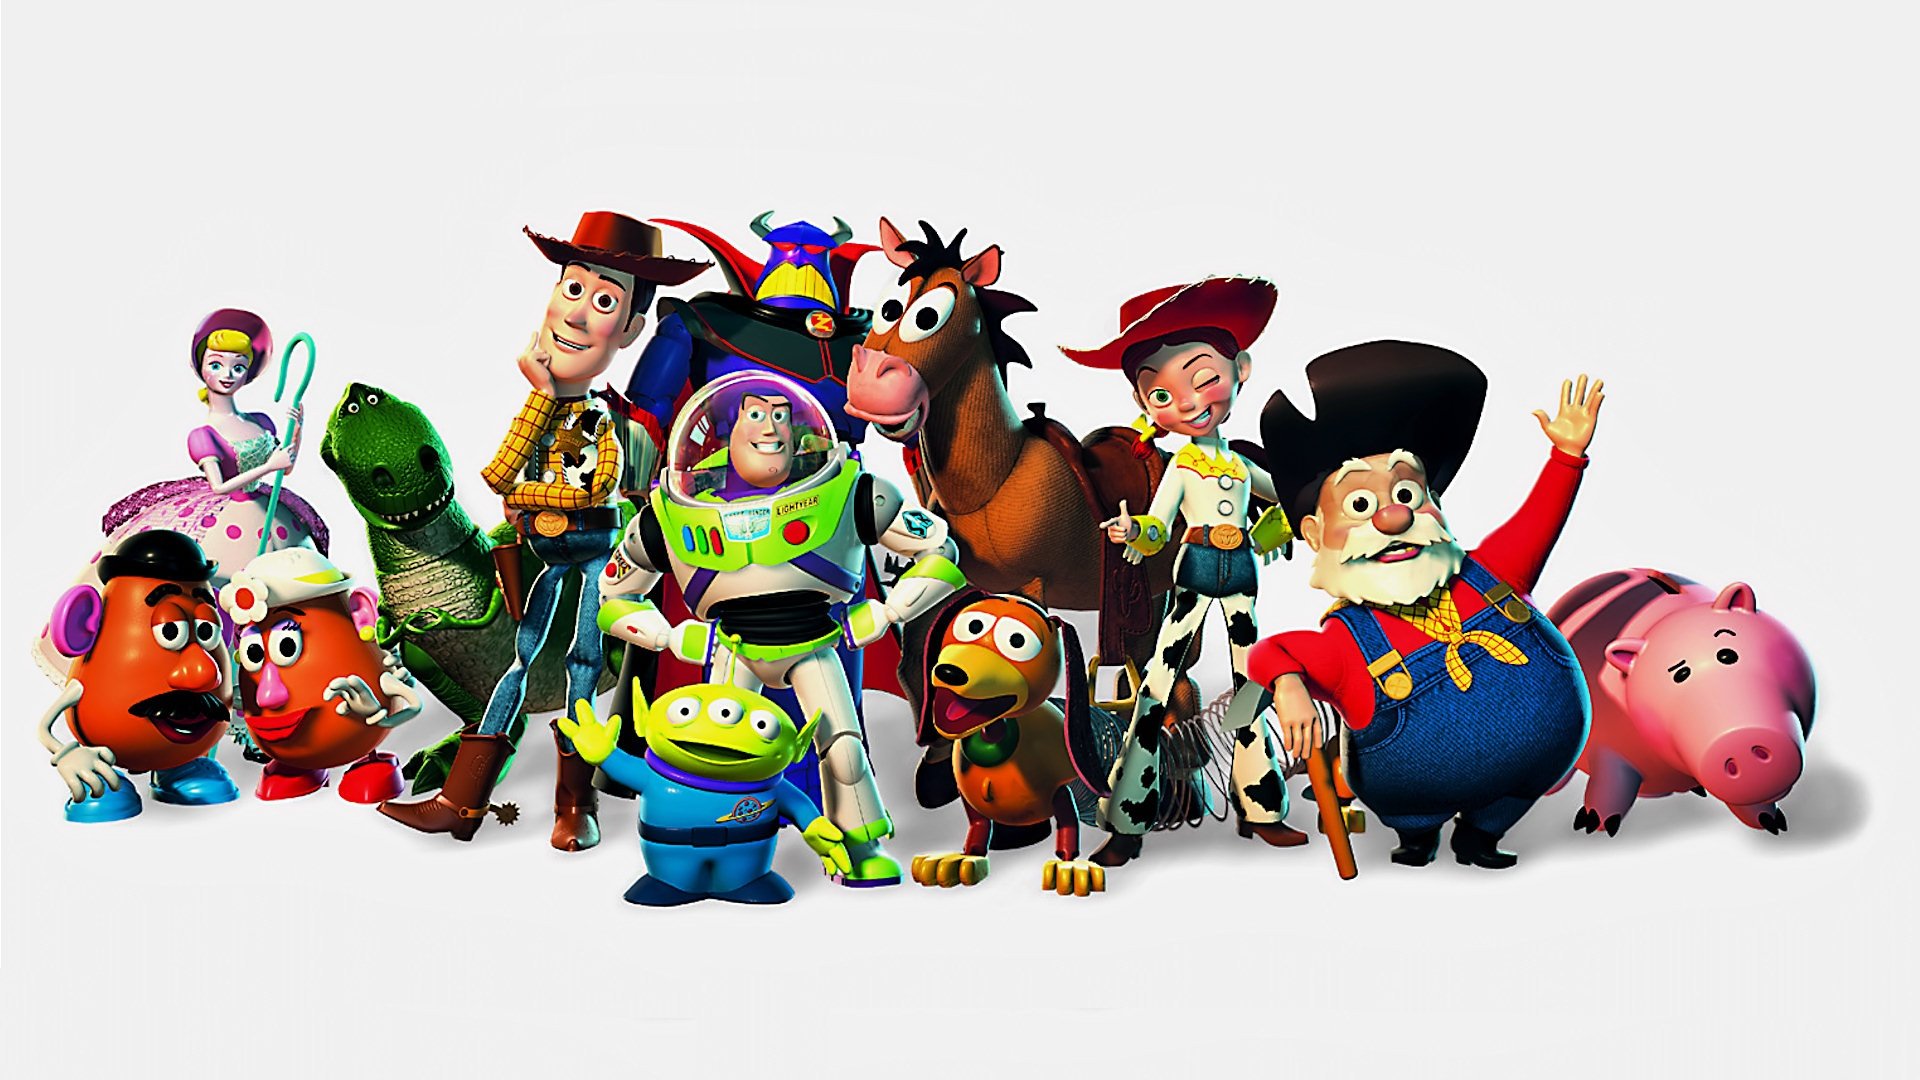 Toy story 1 2 3 wallpapers hd 1920x1080 backgrounds 1920x1080